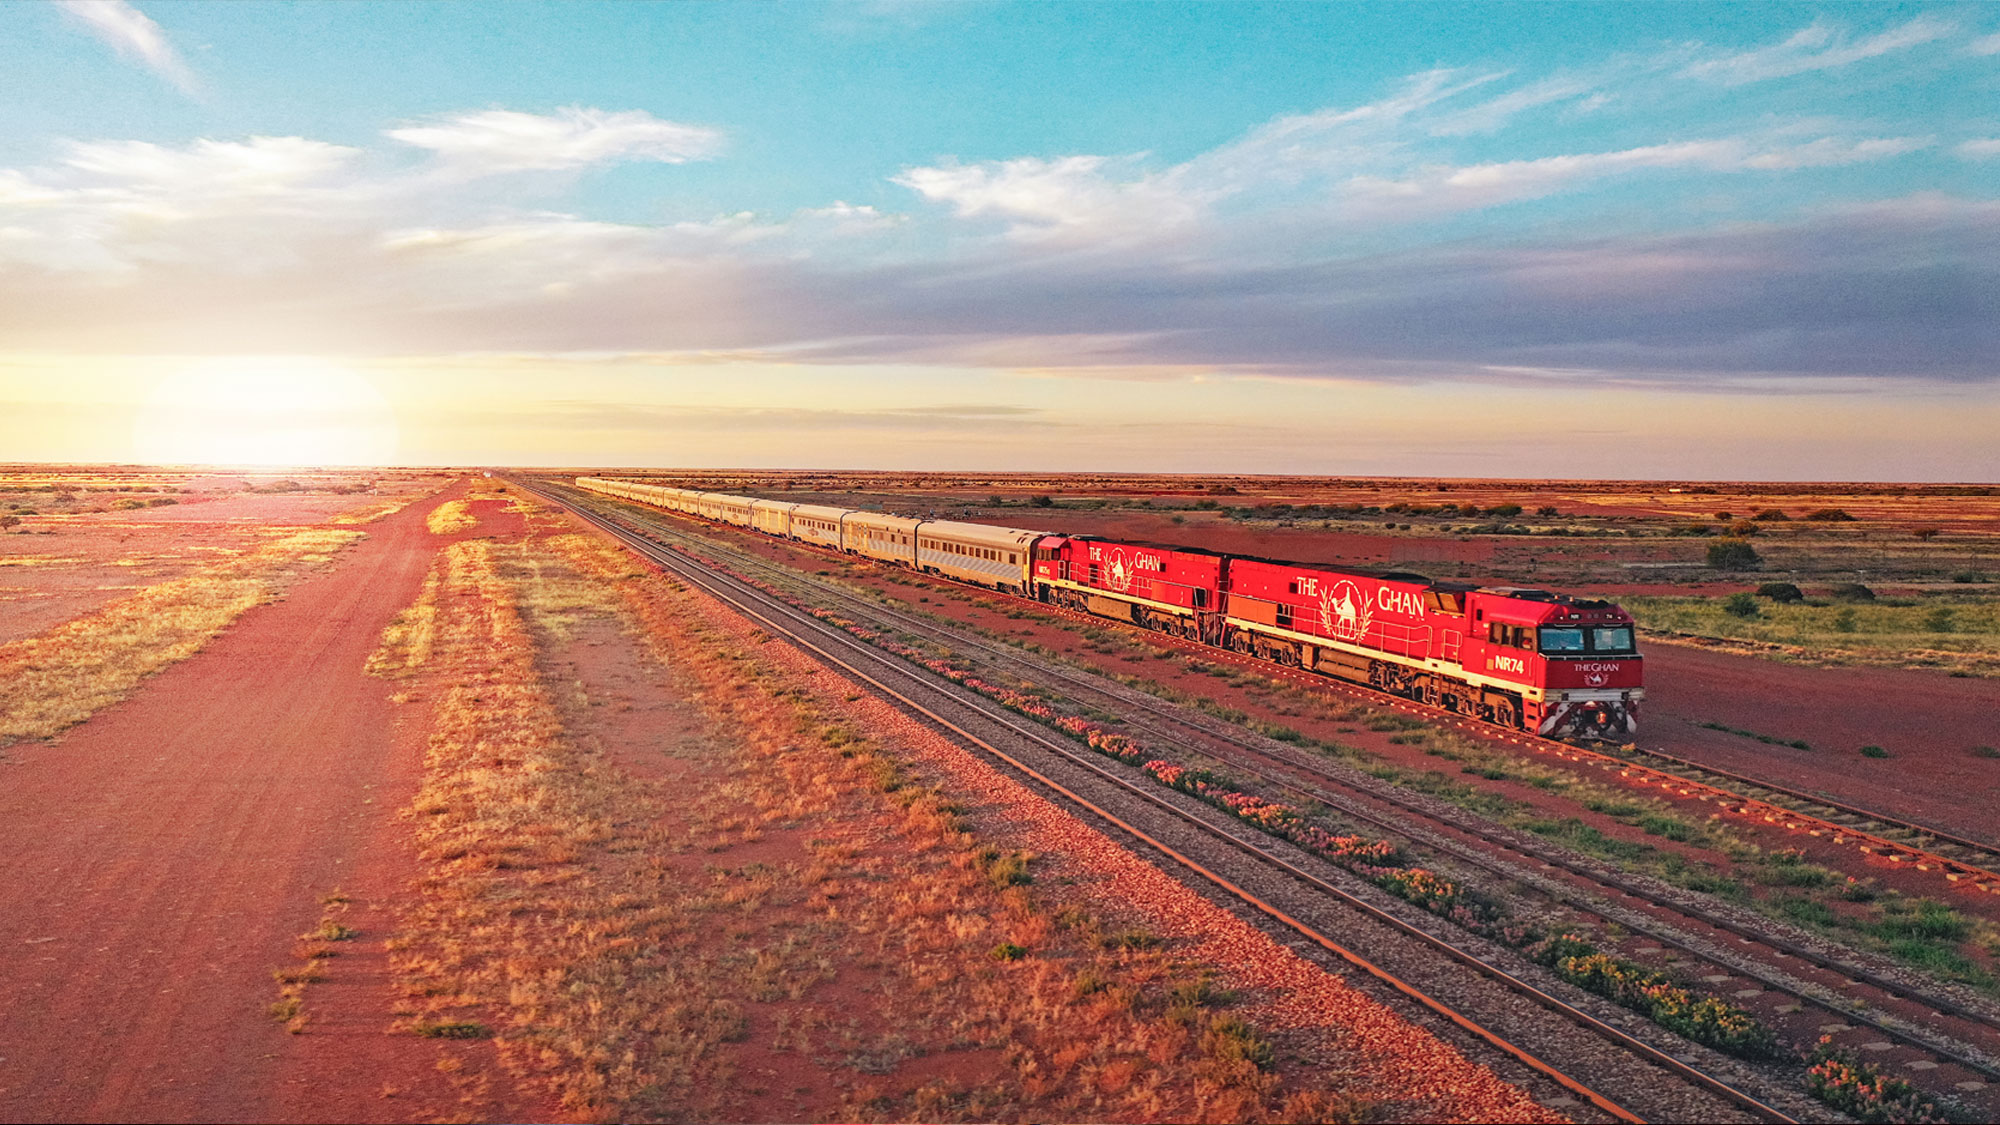 The Ghan Expedition with Top End - NT Now